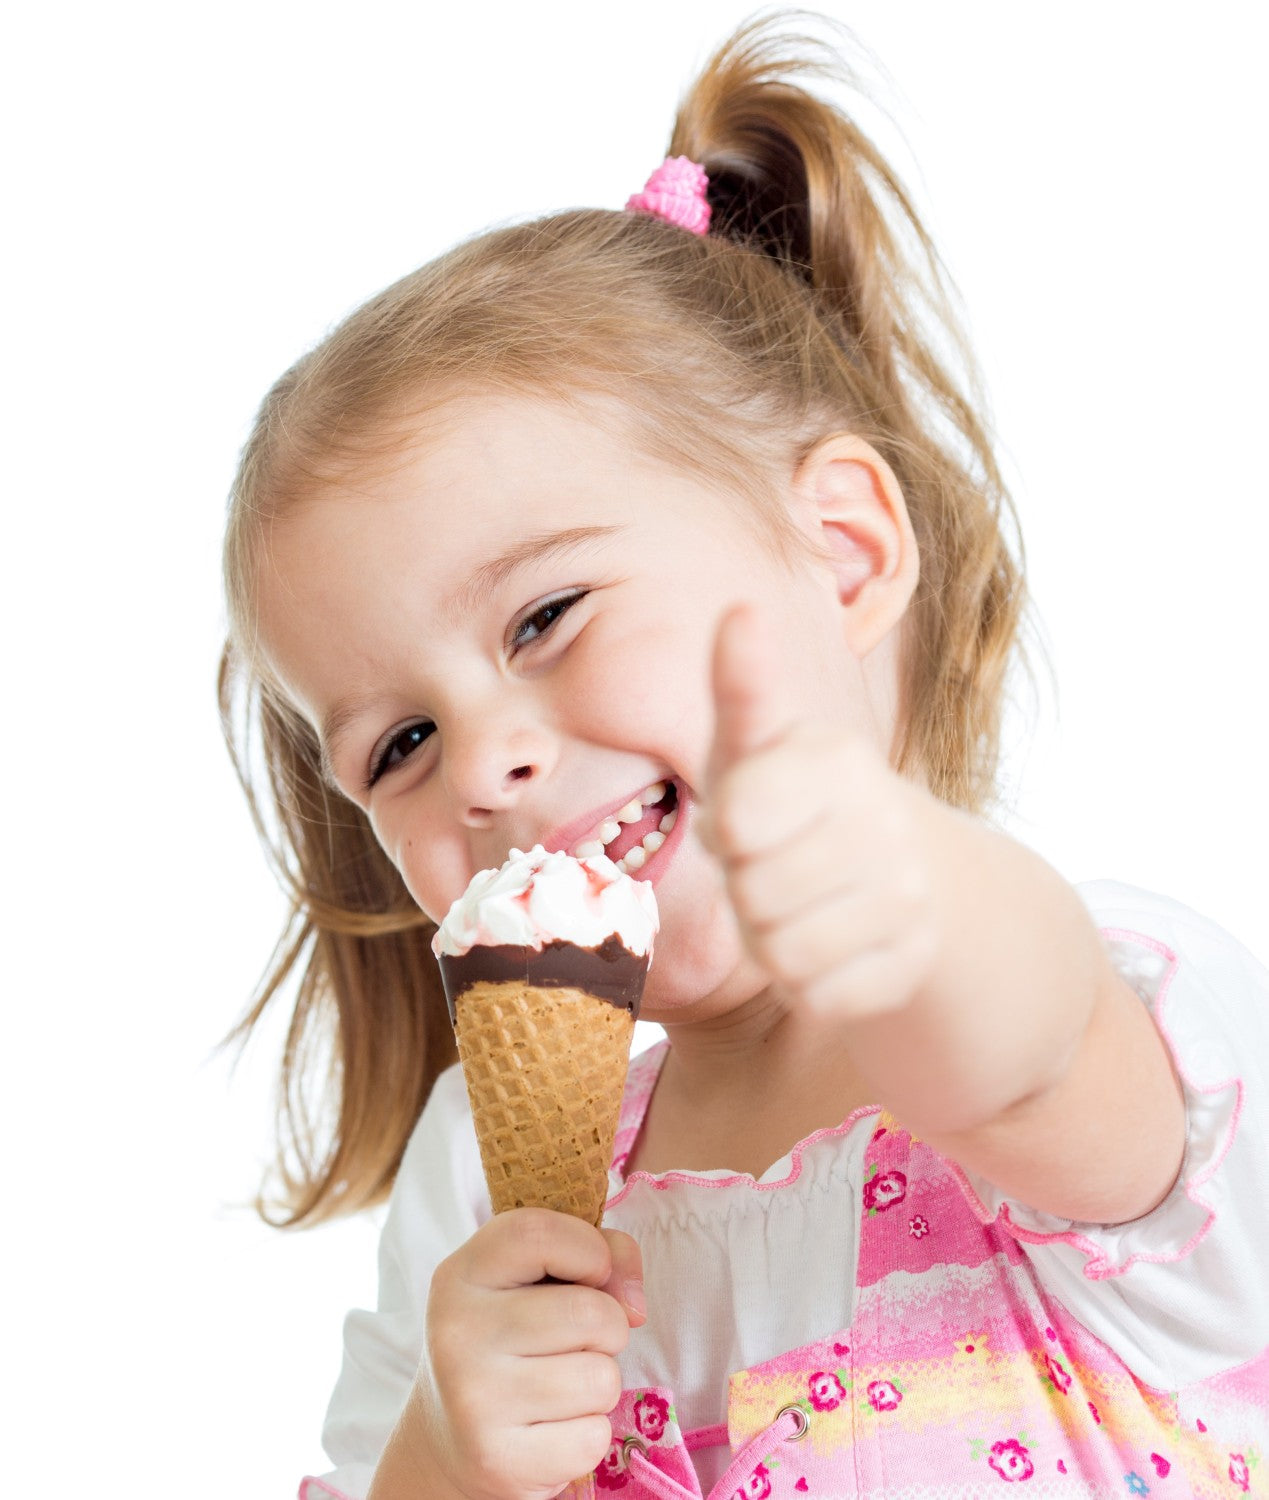 happy girl eating an ice cream treat and giving a thumbs up